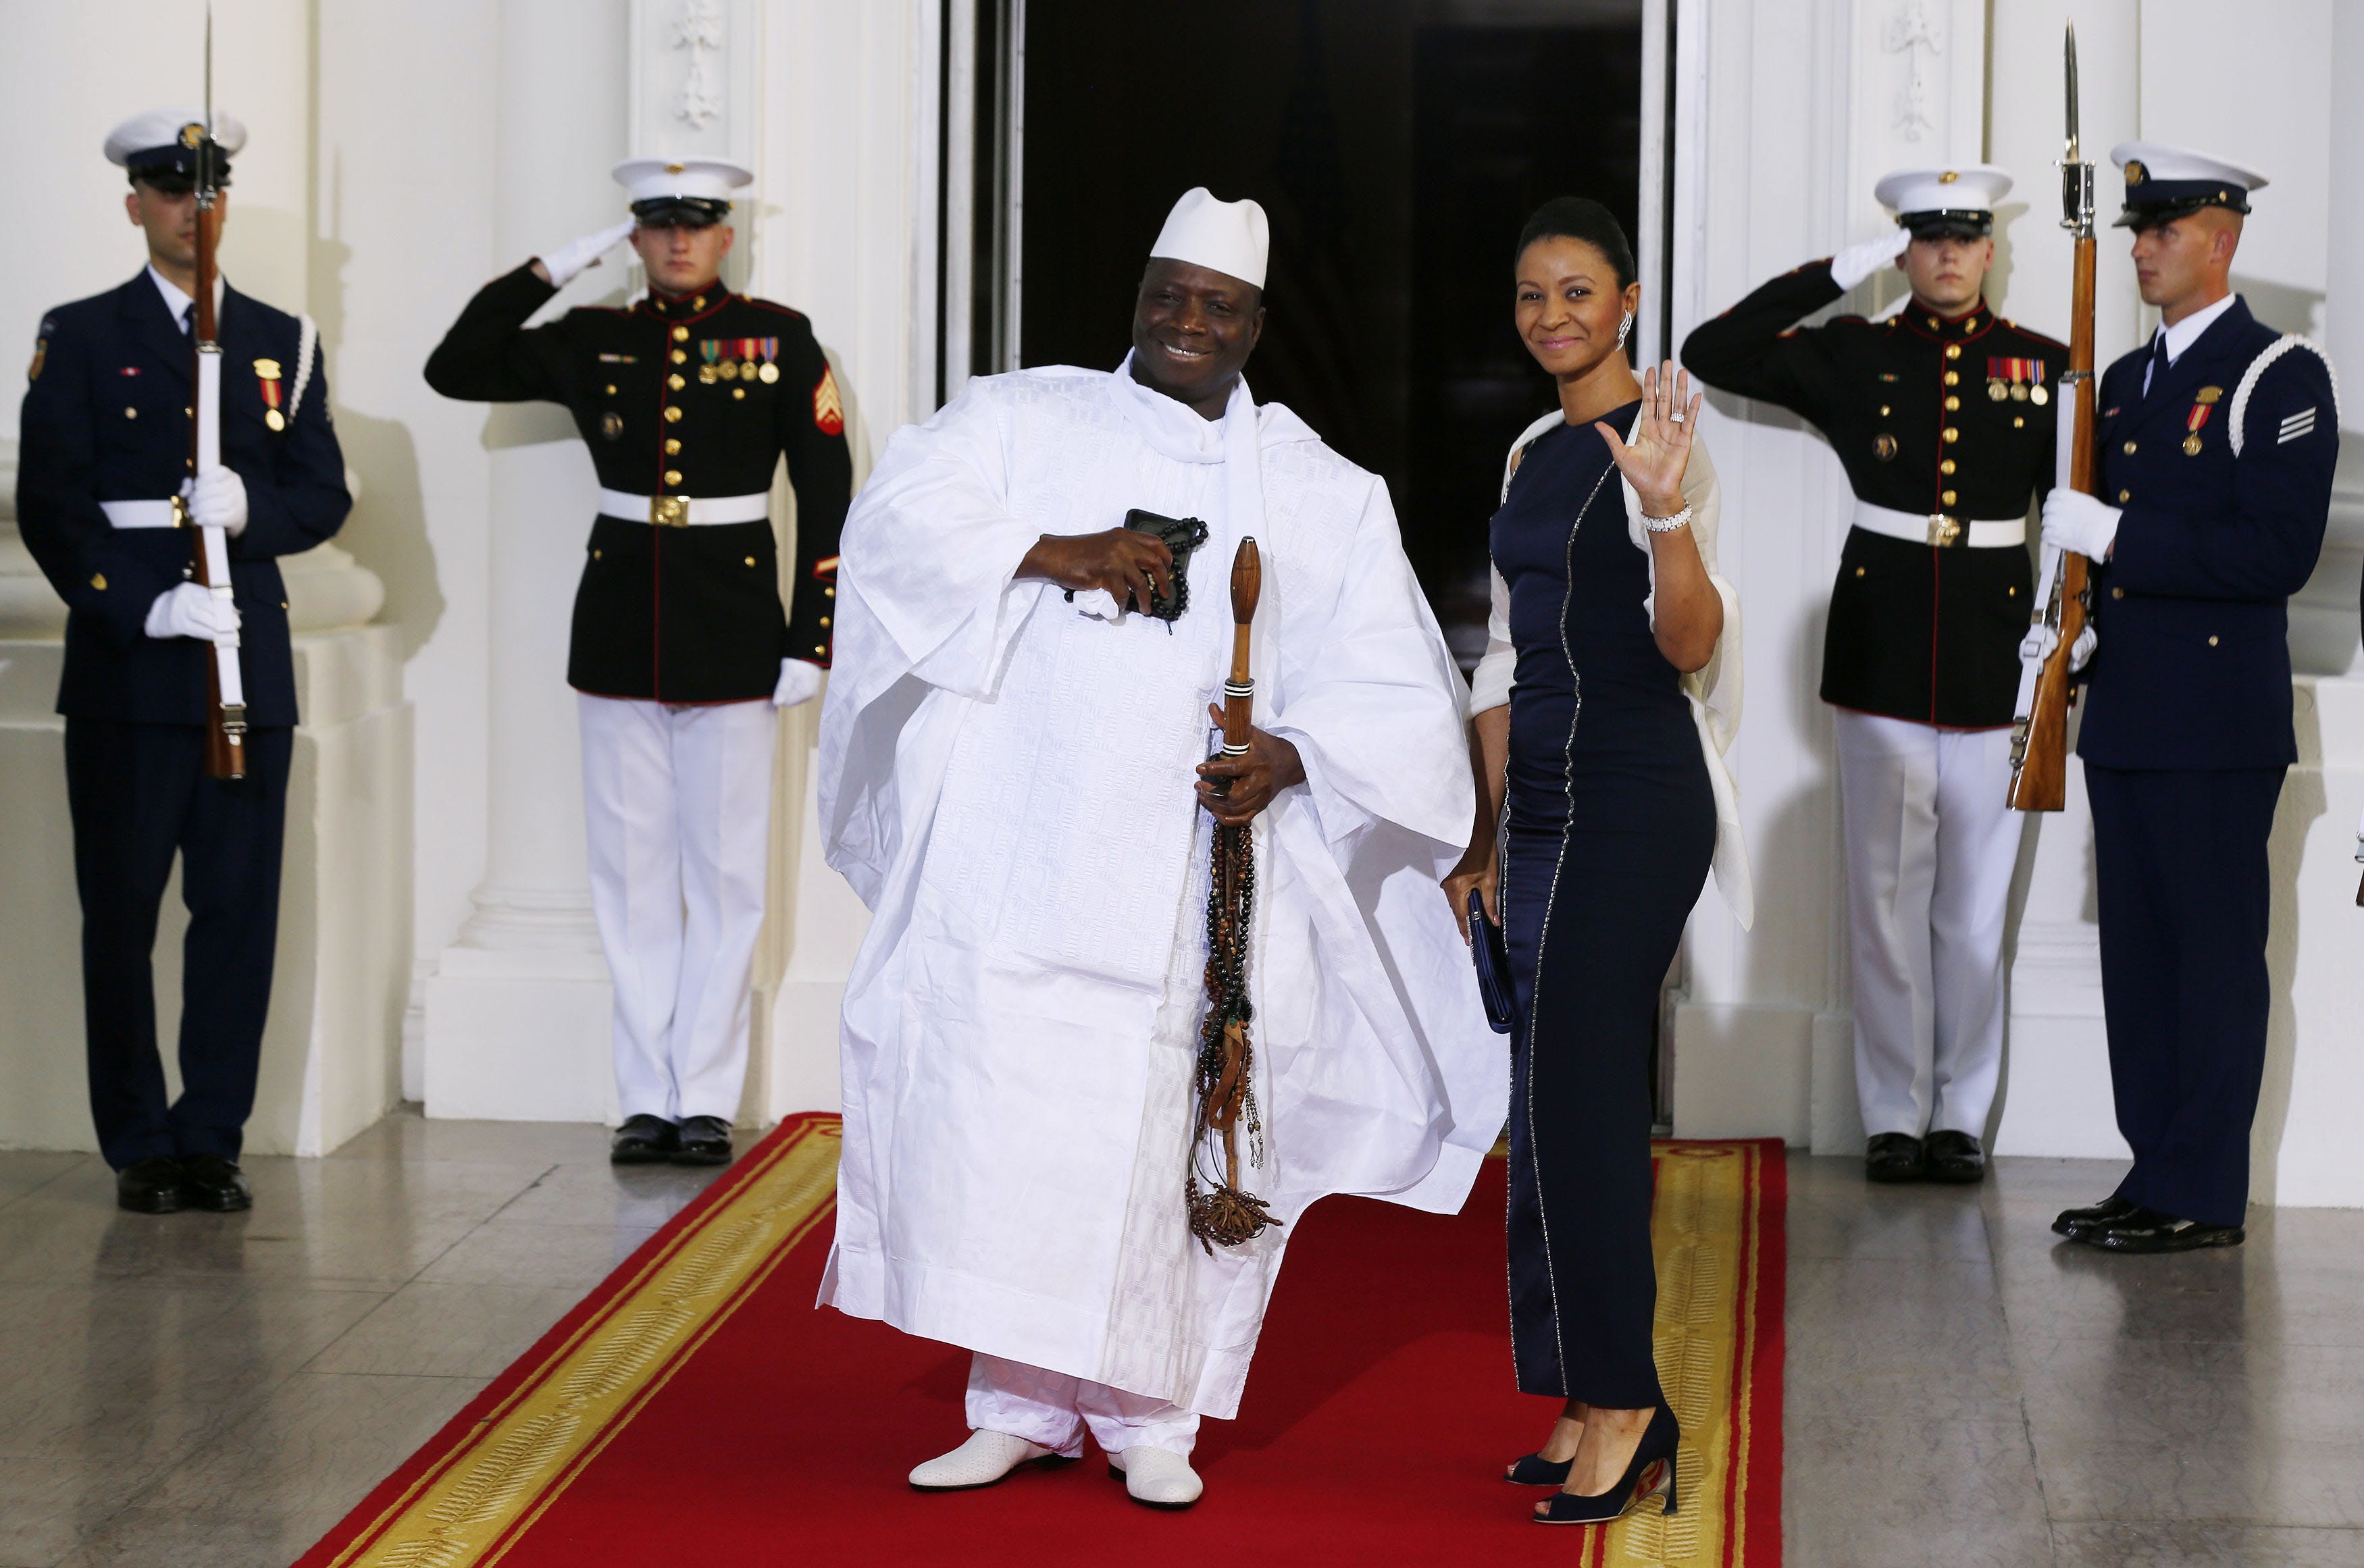 Republic of the Gambia's President Jammeh and his wife arrive for the official U.S.-Africa Leaders Summit dinner hosted by U.S. President Barack Obama at the White House in Washington